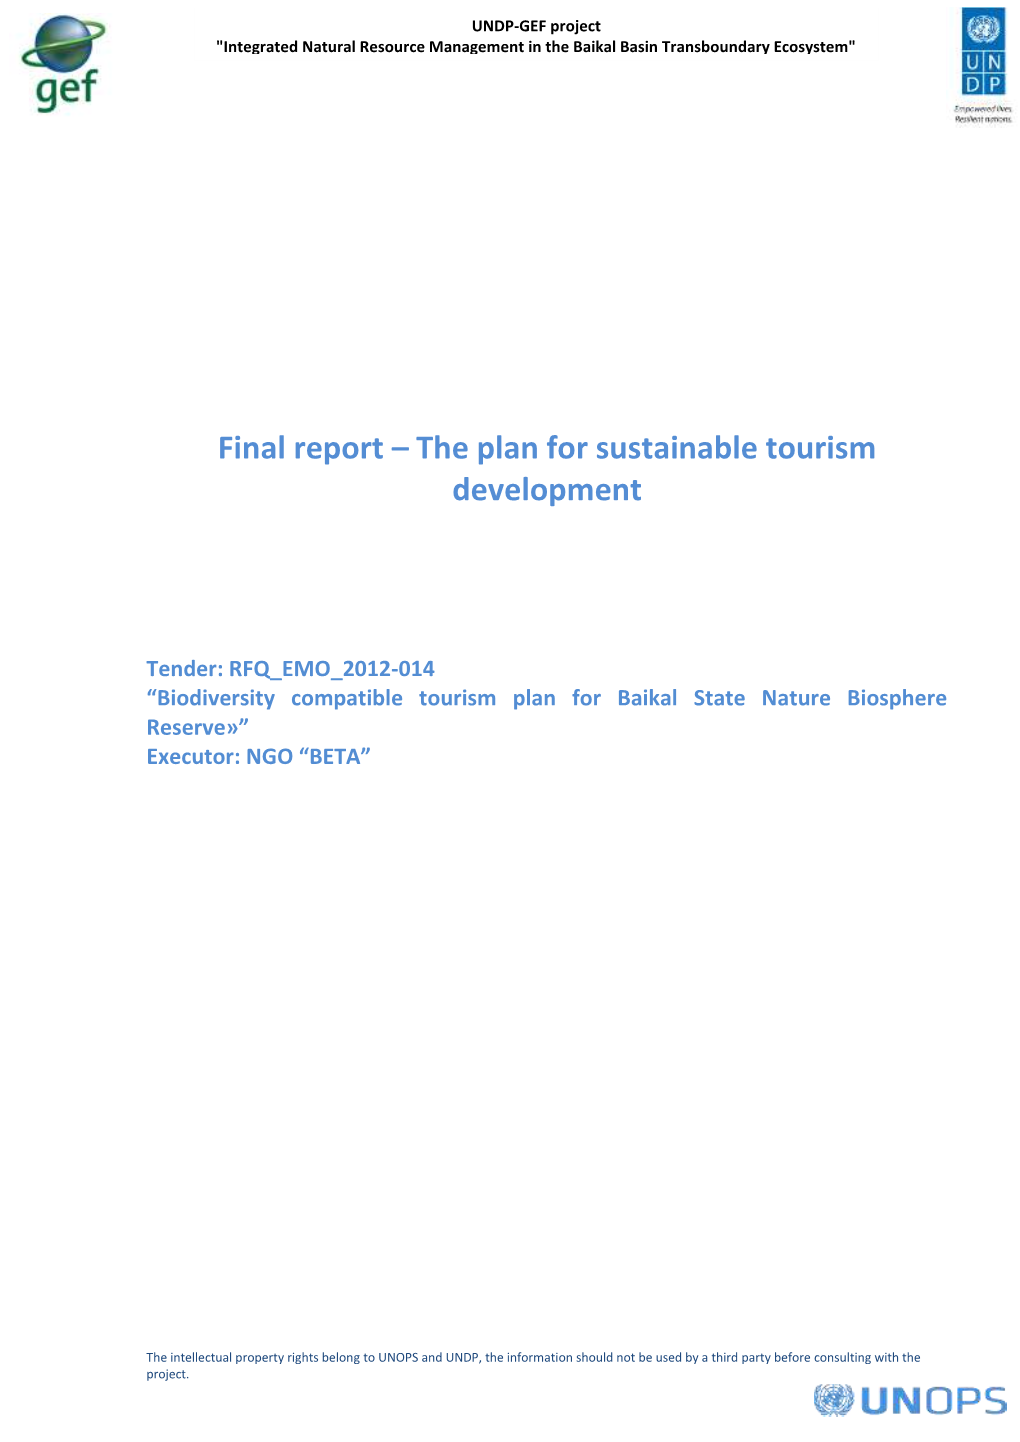 The Plan for Sustainable Tourism Development